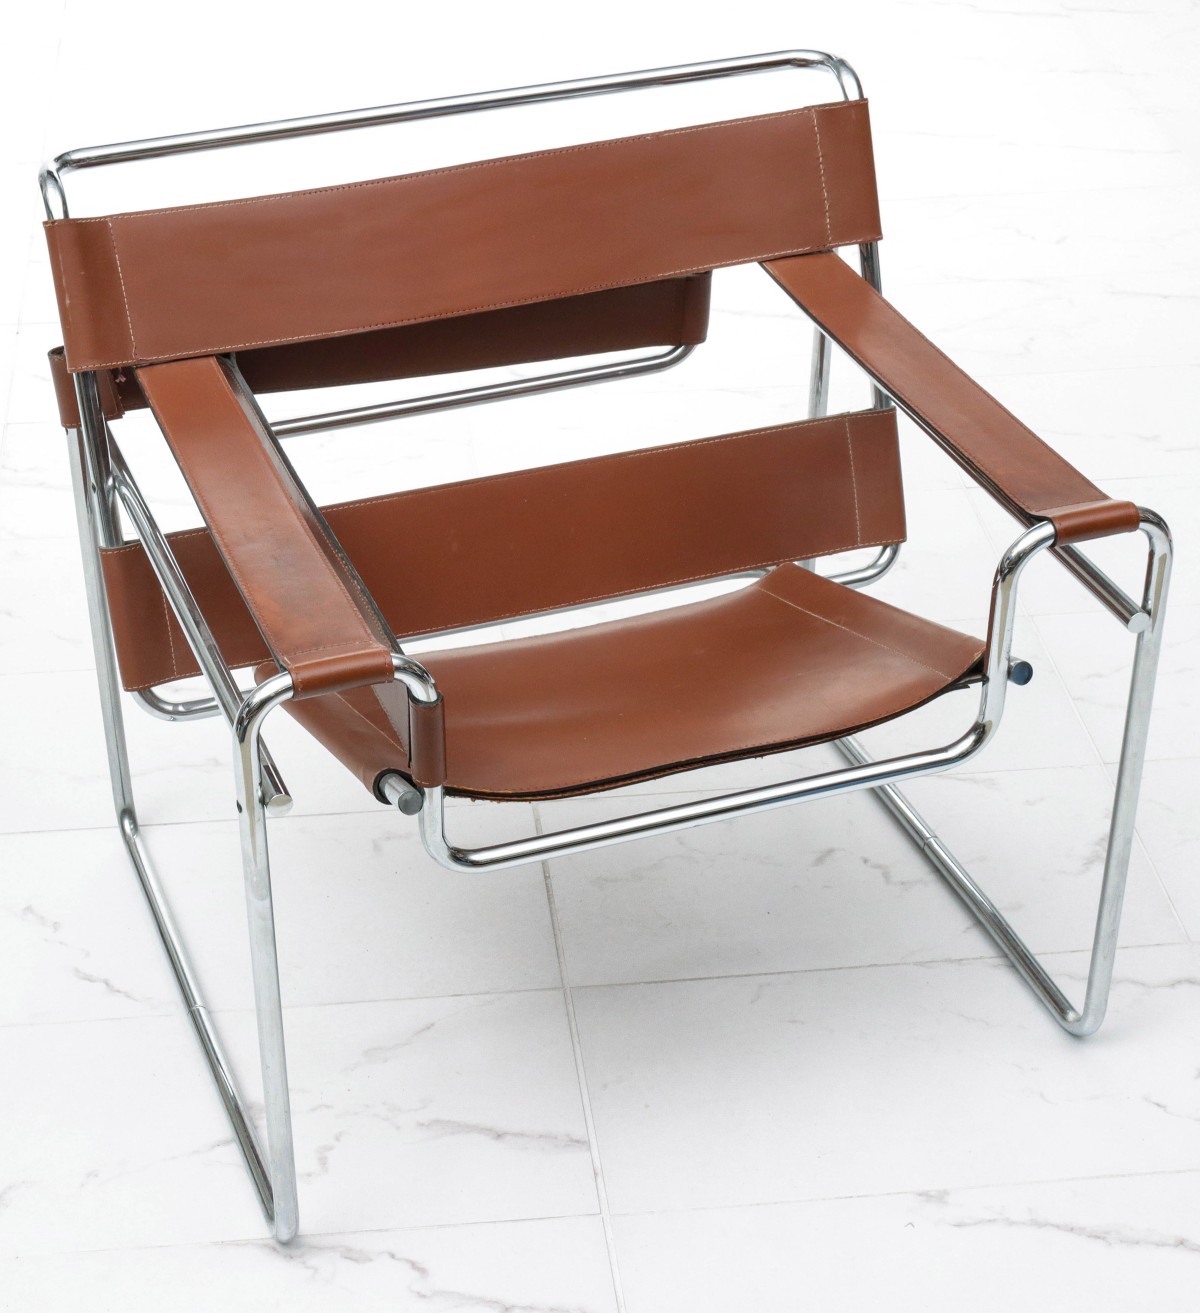 A MARCEL BREUER WASSILY CHAIR FOR KNOLL - AS FOUND